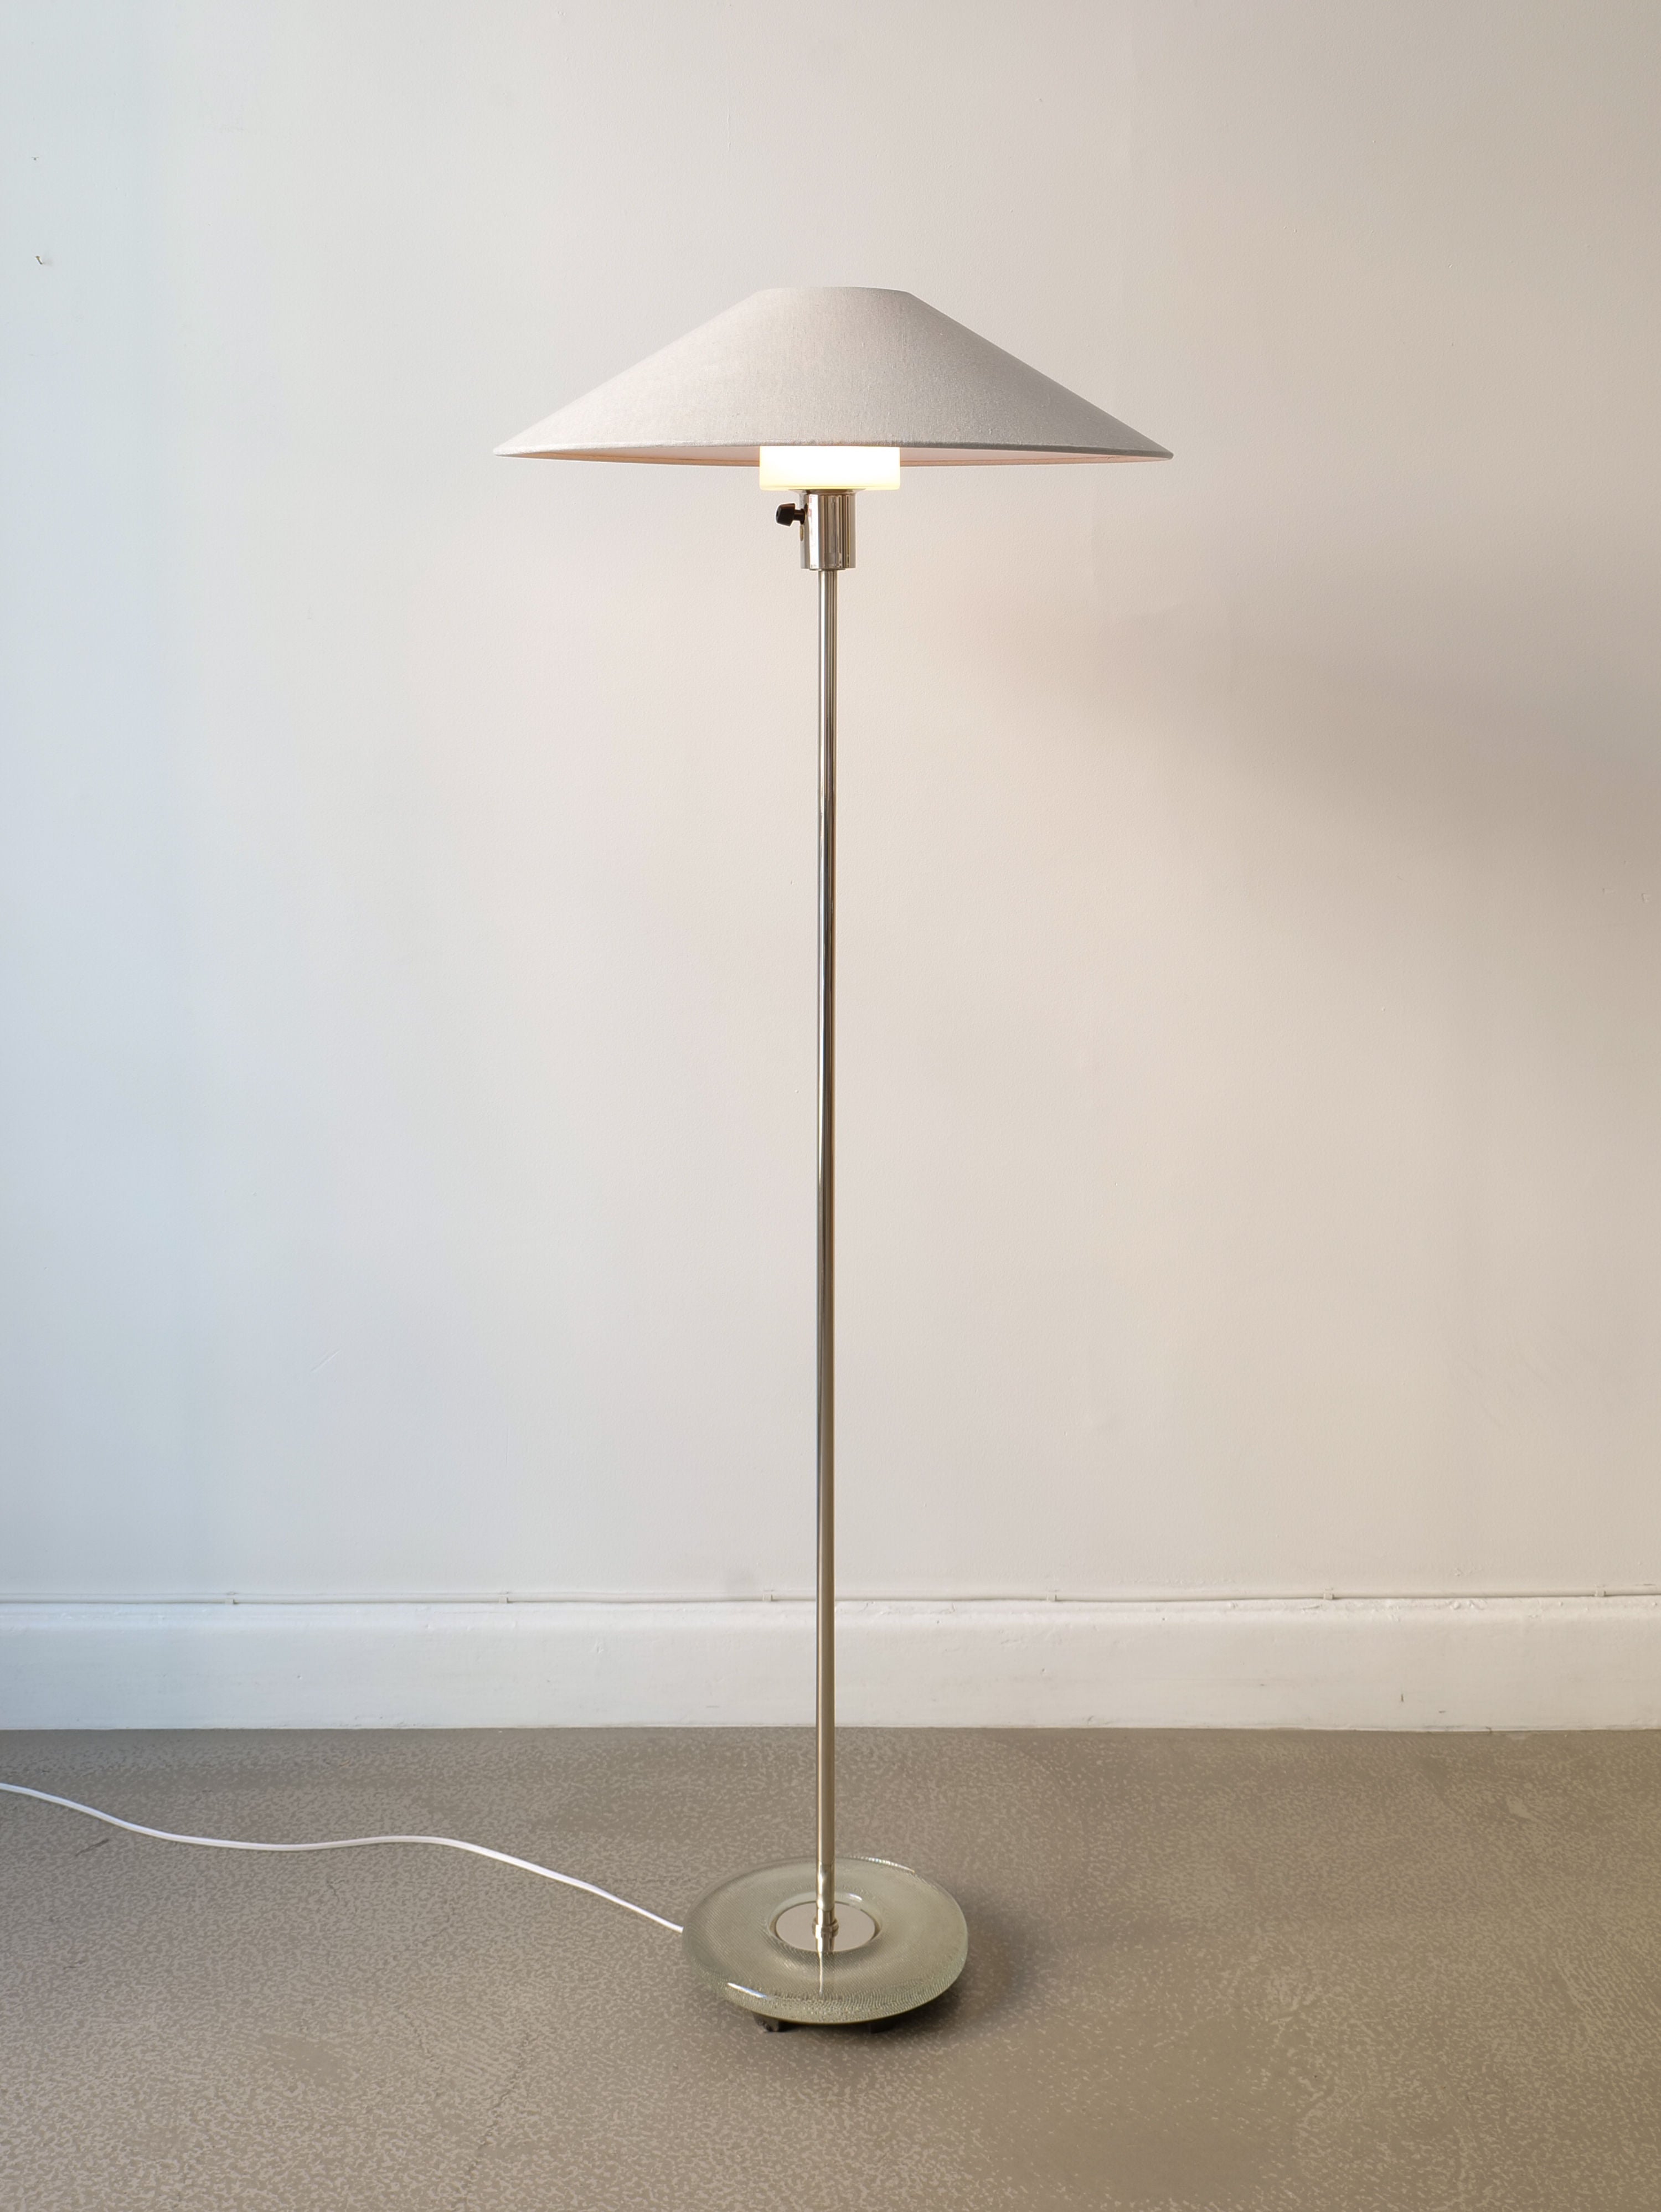 A Deco Floor Lamp Harald Notini 1940s graces the room, showcasing Swedish Modern design and exceptional craftsmanship from Collection apart.